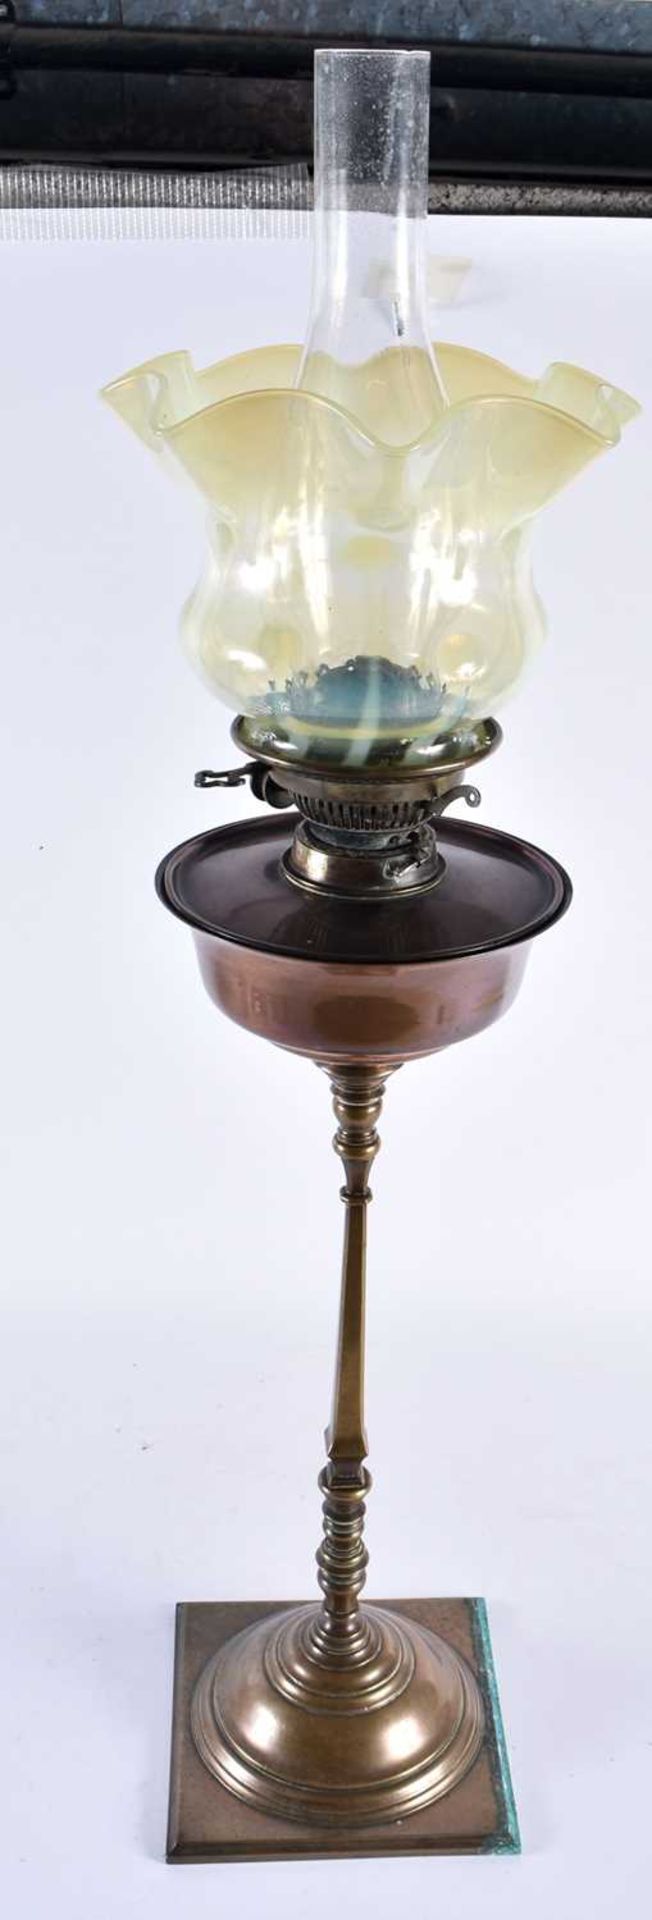 A LARGE ANTQUE J W BENSON COPPER AND BRONZE OIL LAMP with Vaseline shade. 74 cm high.